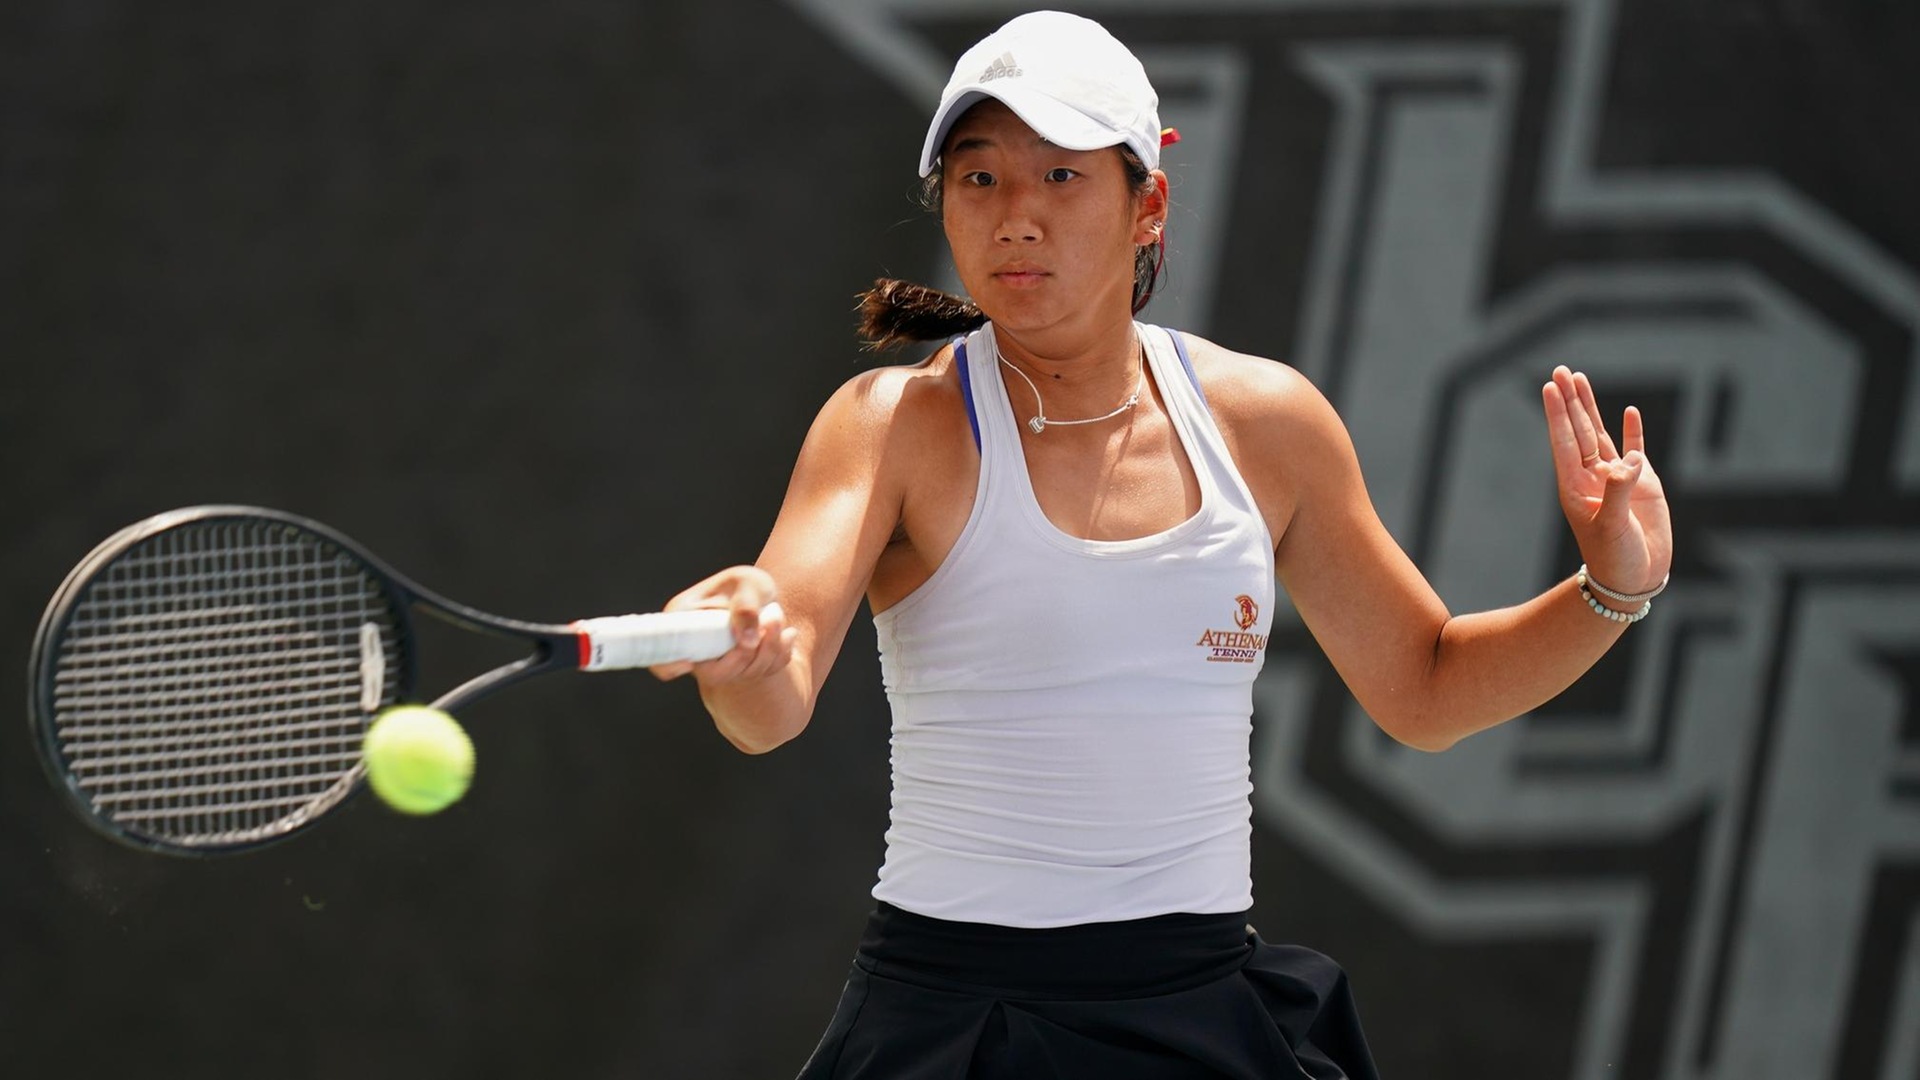 Audrey Yoon won a 6-0 third set for the clinch (photo courtesy USTA)